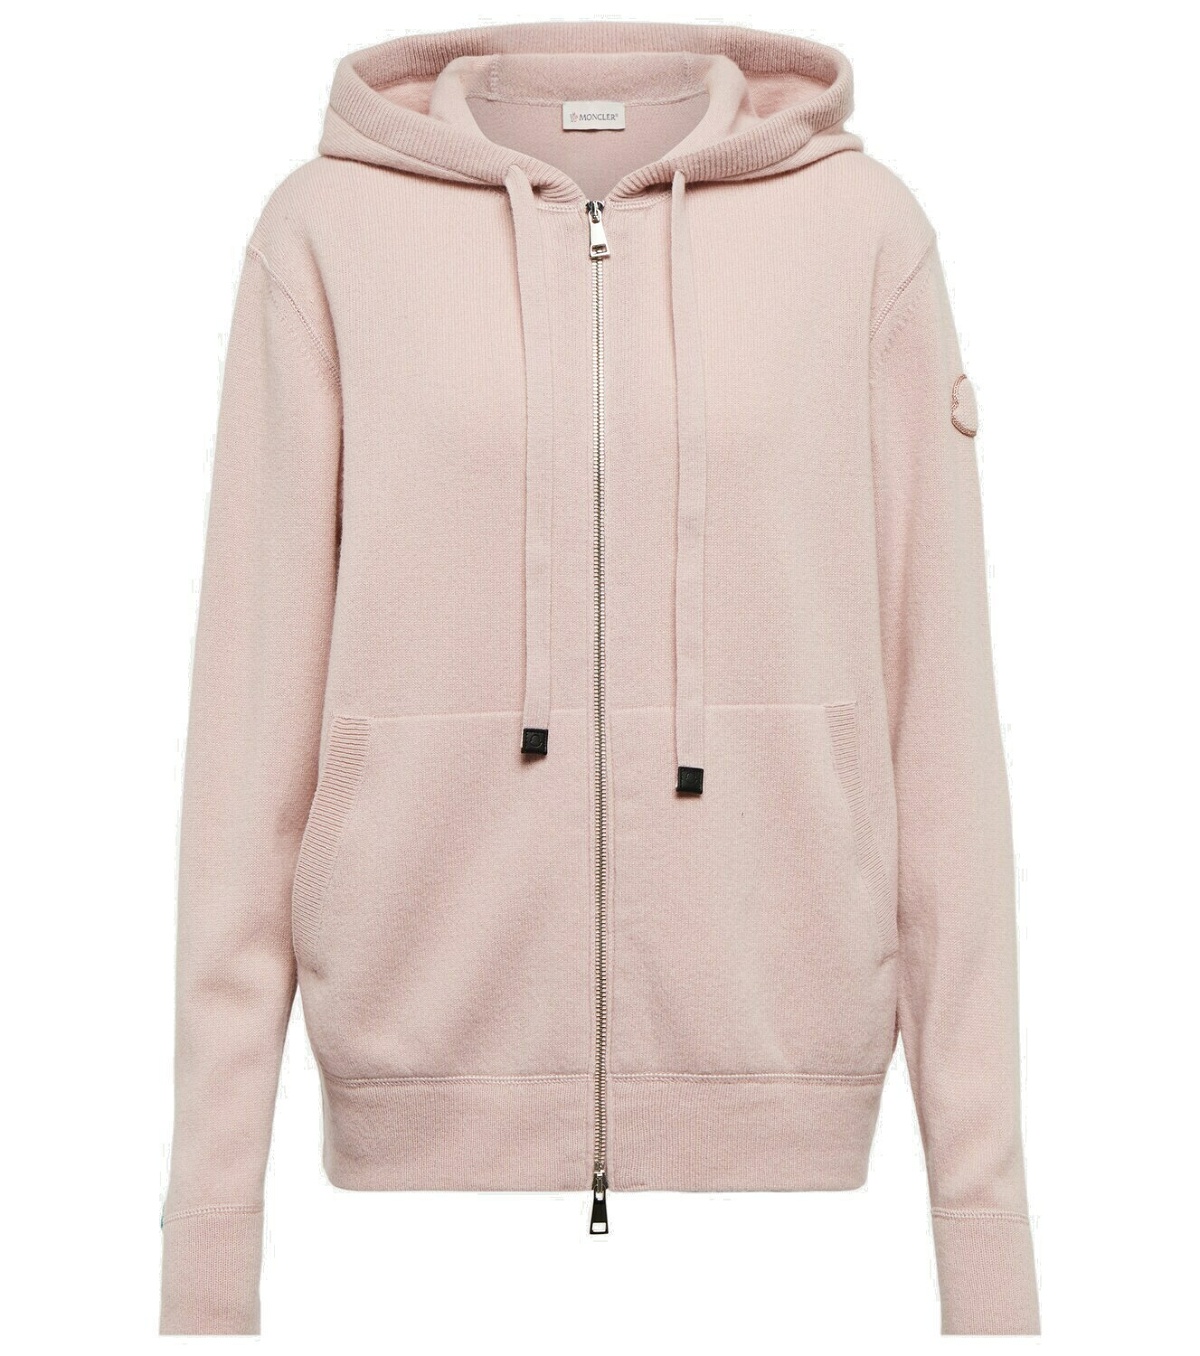 Moncler - Wool and cashmere zipped hoodie Moncler